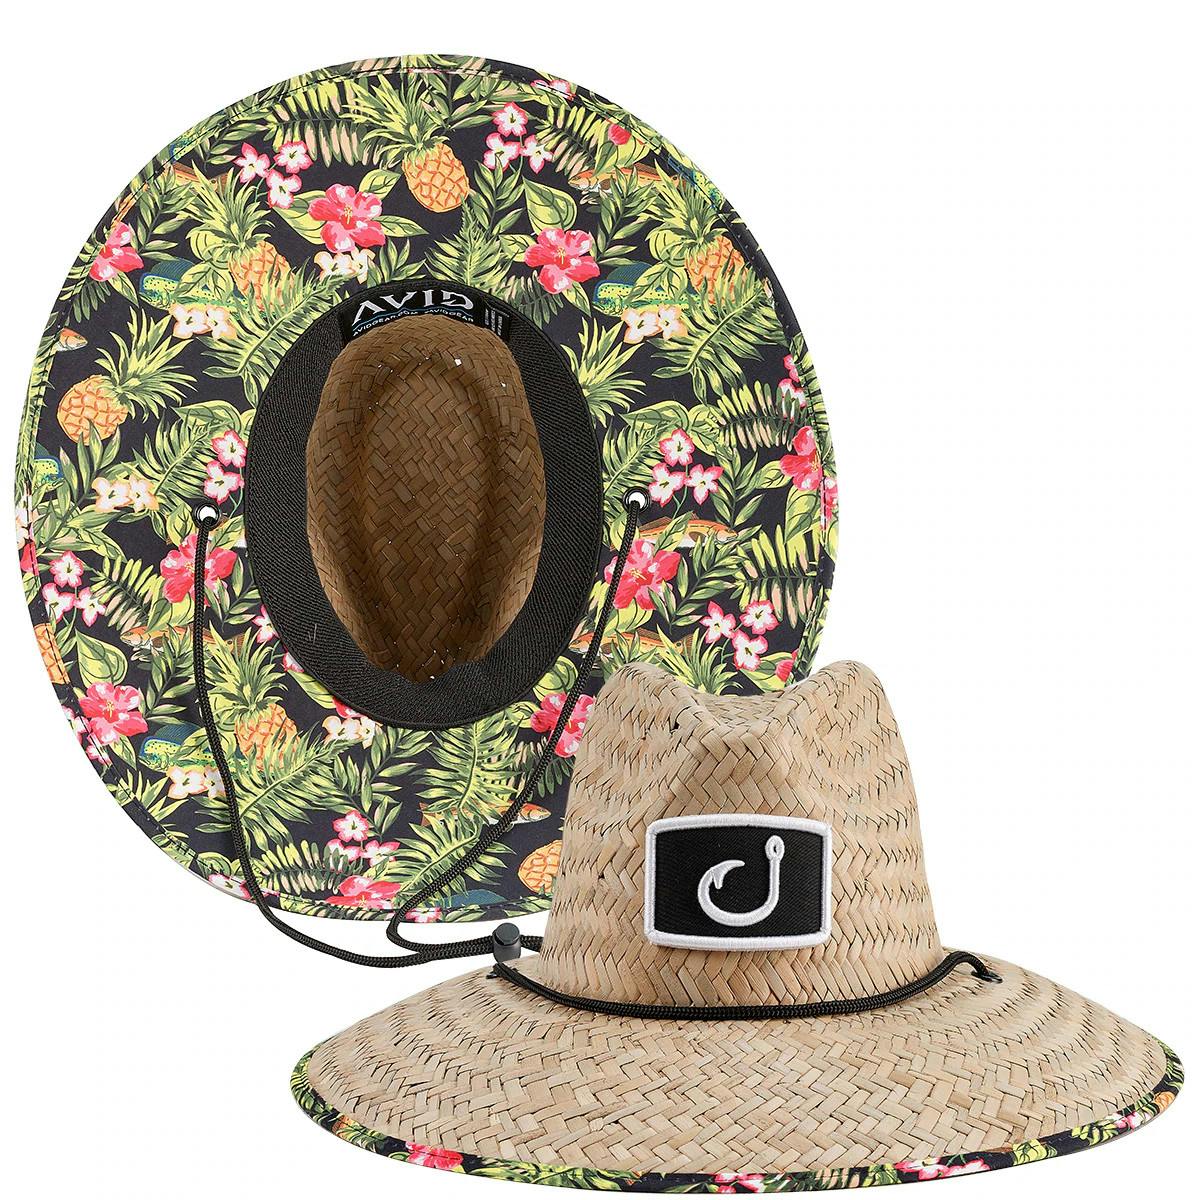 AVID Pinch Front Straw Hat - Pineapple Express